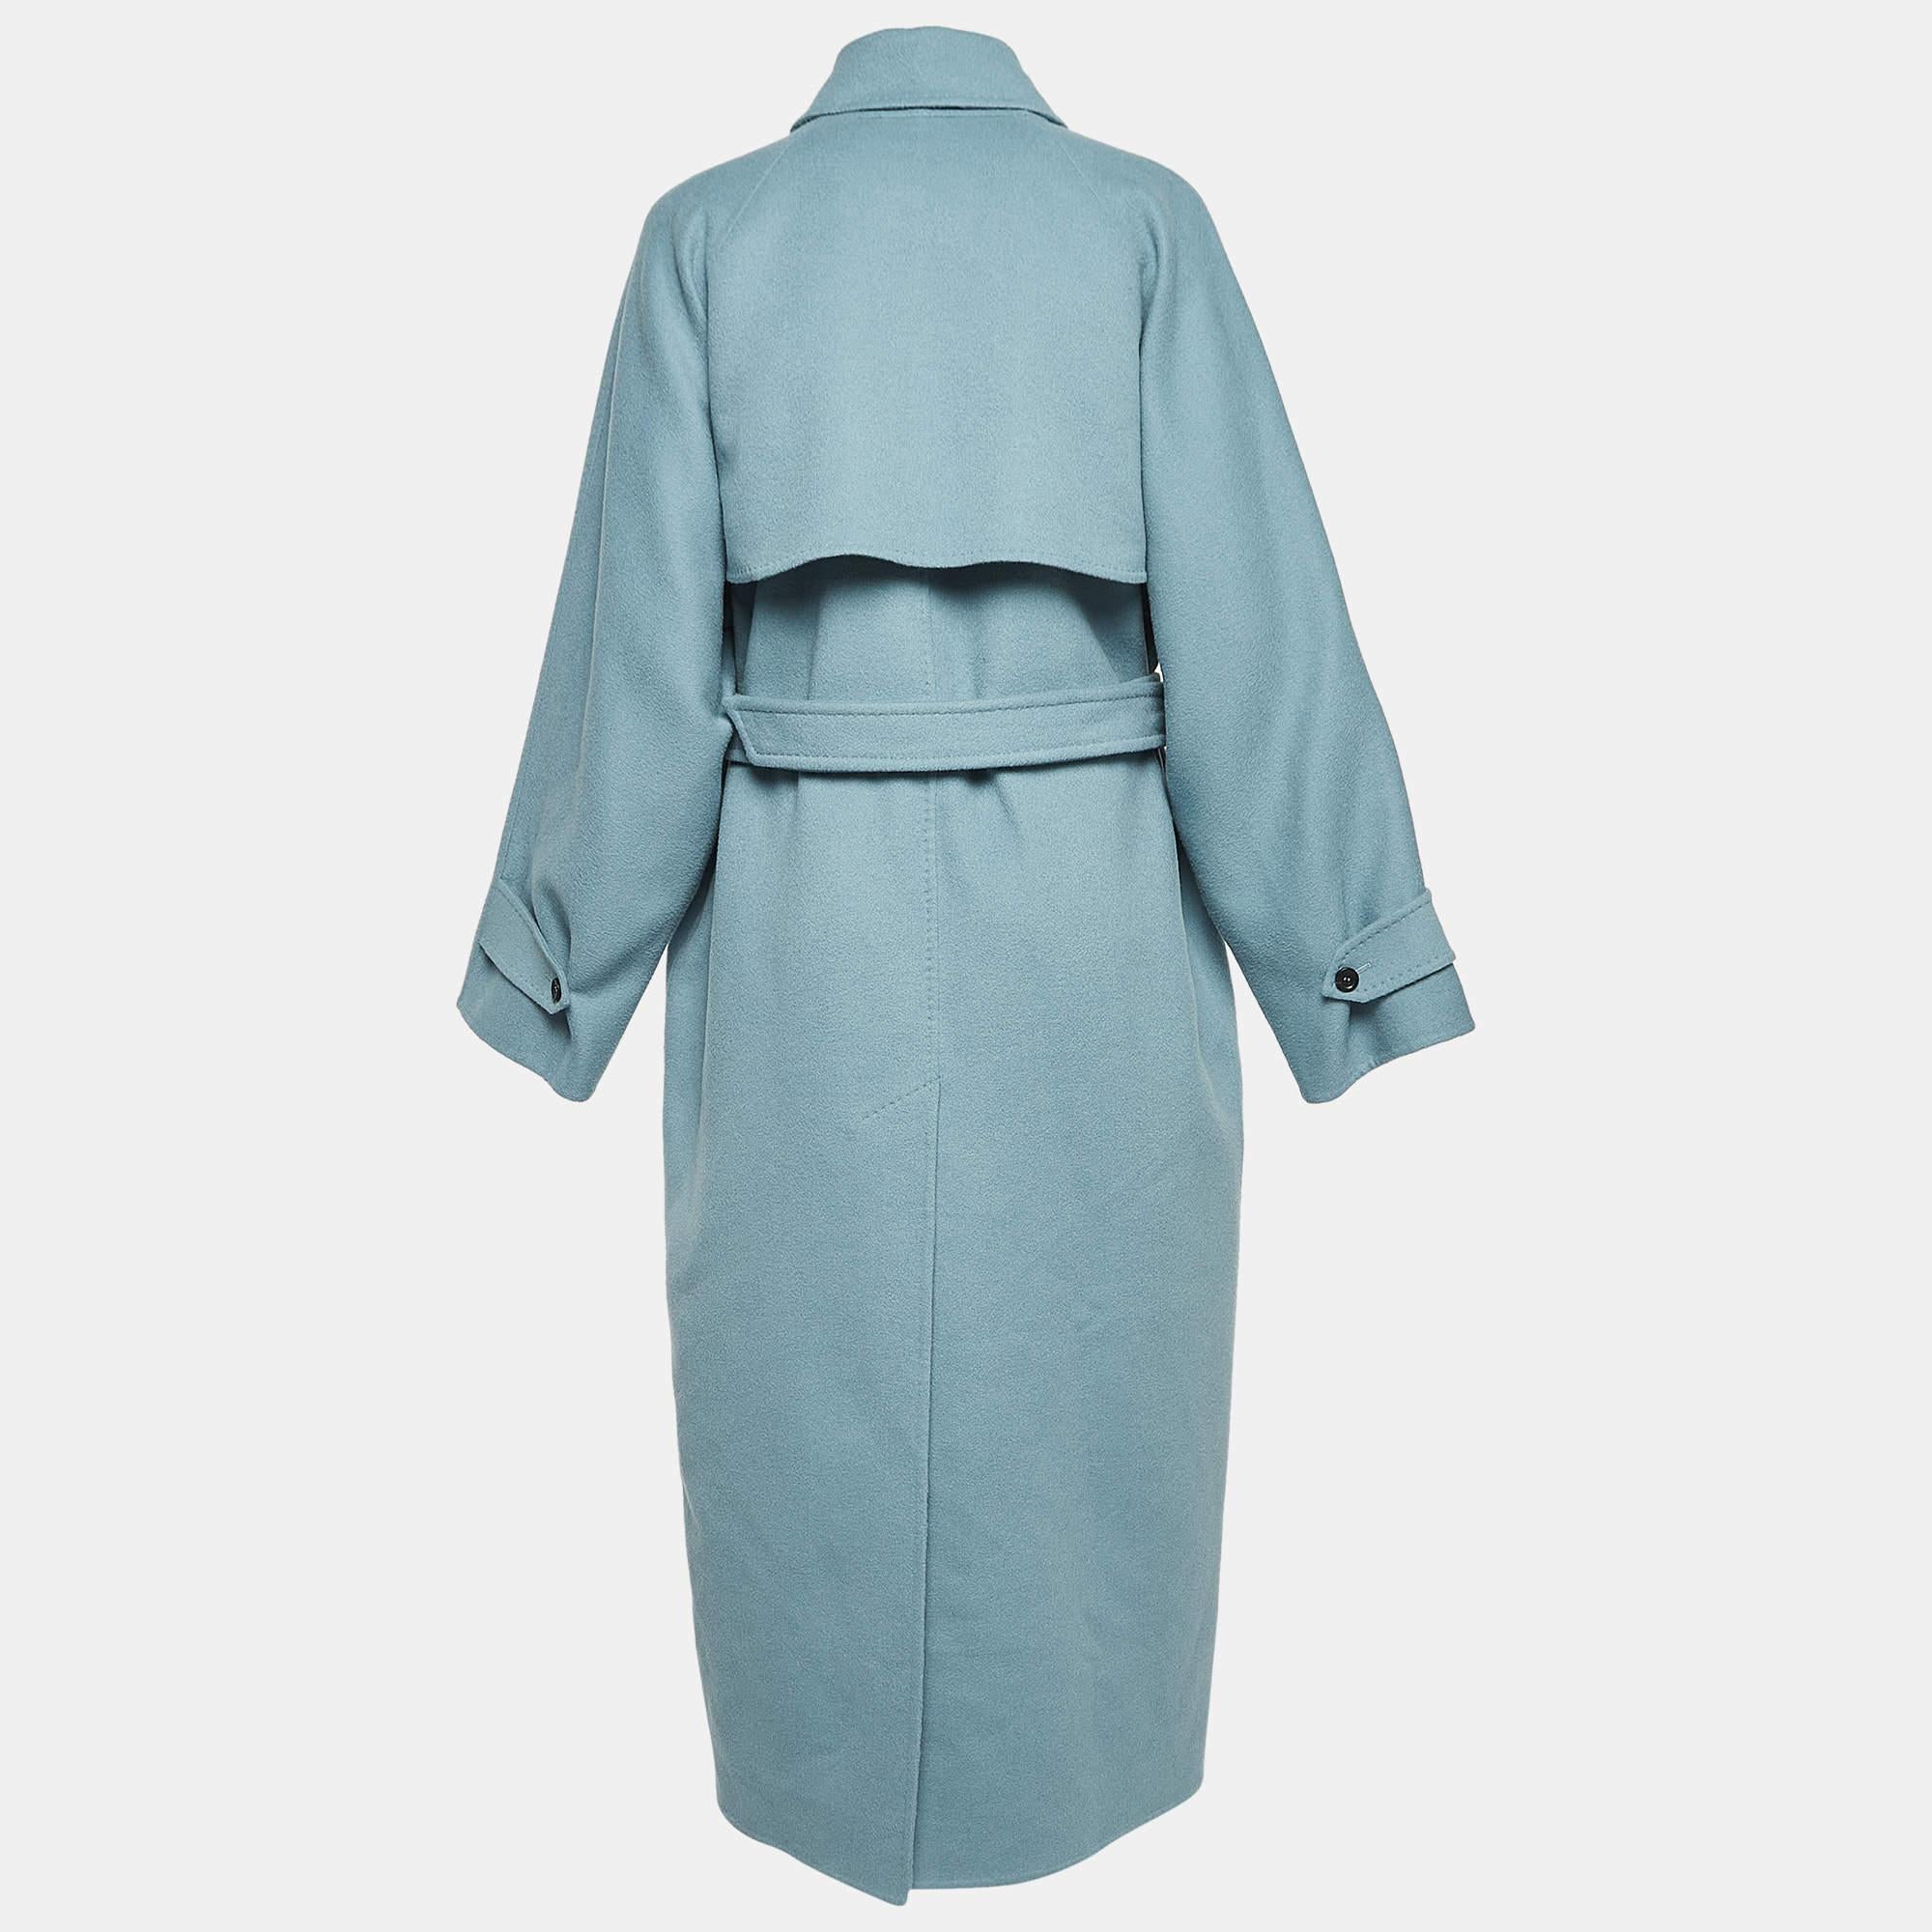 Let this Max Mara trench coat be your style companion for chilly days. Crafted with precision from the finest materials, it showcases the epitome of craftsmanship and style, making a timeless statement in any wardrobe.

Includes: Price Tag, Belt